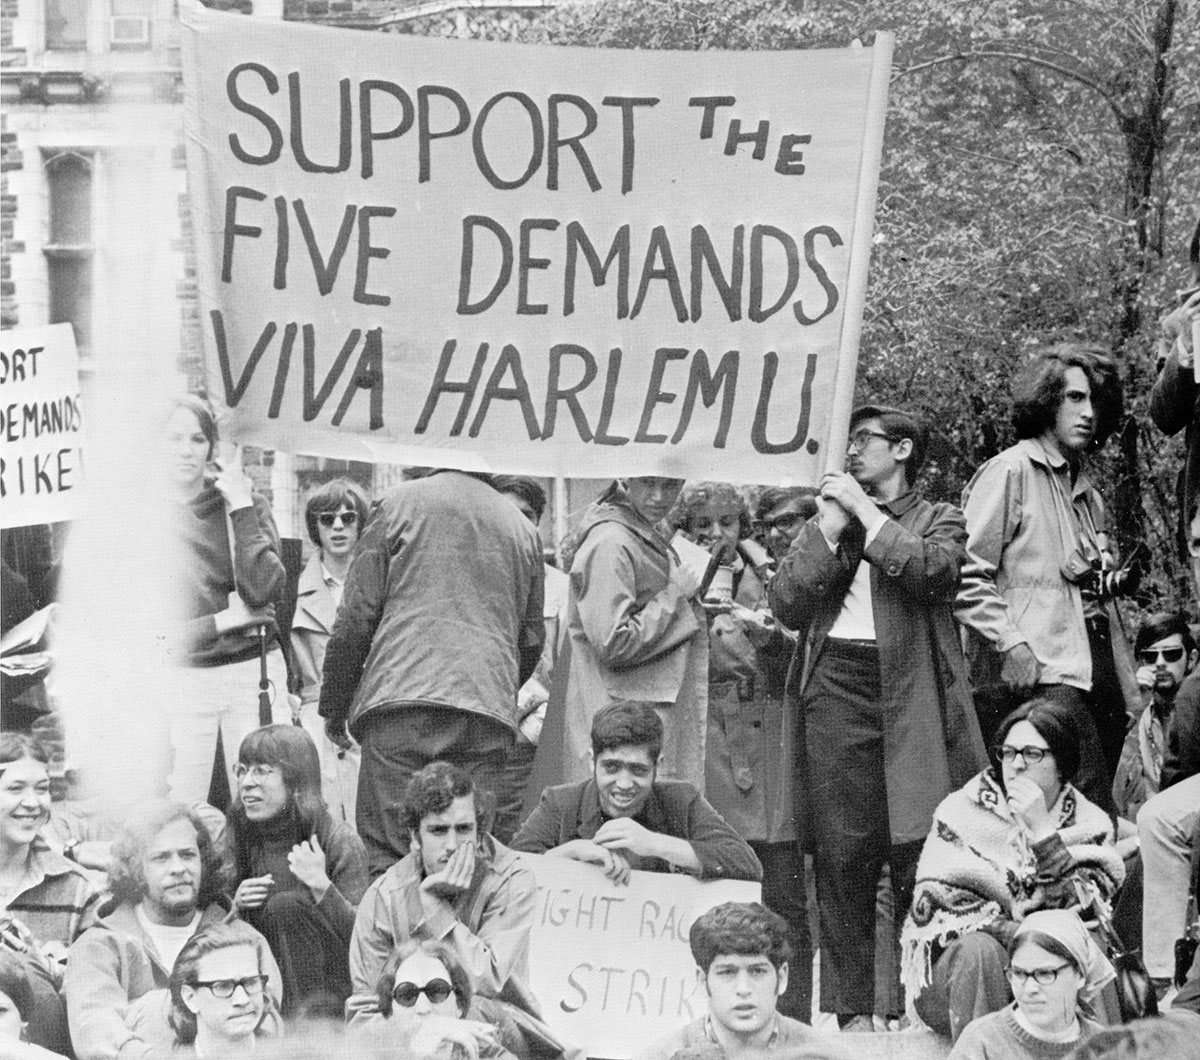 College students, most appearing to be white, hold signs at a rally outdoors with trees behind them. One student has a loudspeaker. The largest banner reads, "Support the Five Demands - Viva Harlem U."
